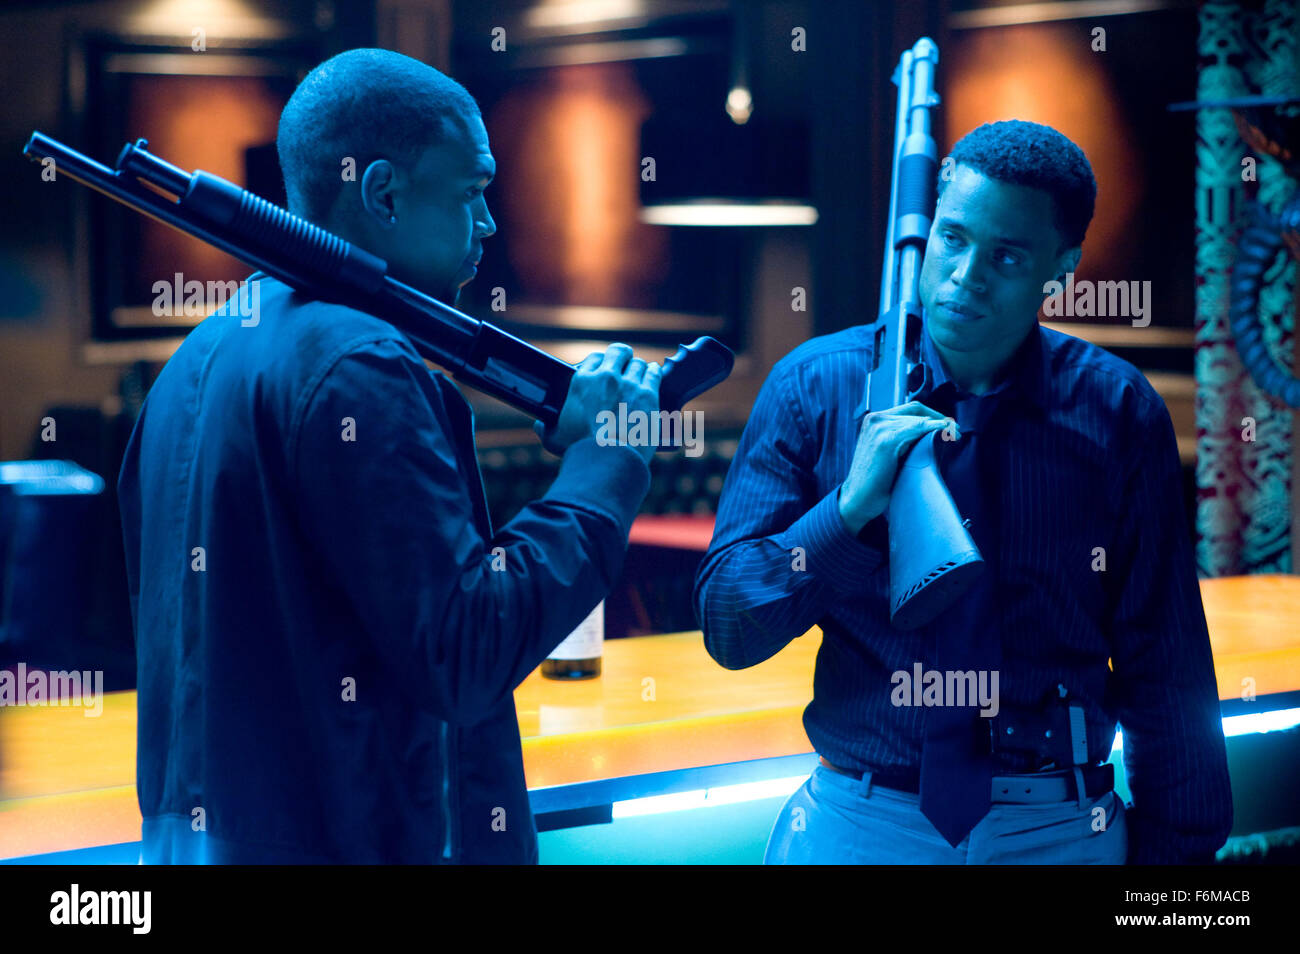 RELEASE DATE: February 26, 2010. MOVIE TITLE: Takers. STUDIO: Screen Gems. PLOT: A group of bank robbers find their 0 million plan interrupted by a hard-boiled detective. PICTURED: CHRIS BROWN (left) and MICHAEL EALY Stock Photo